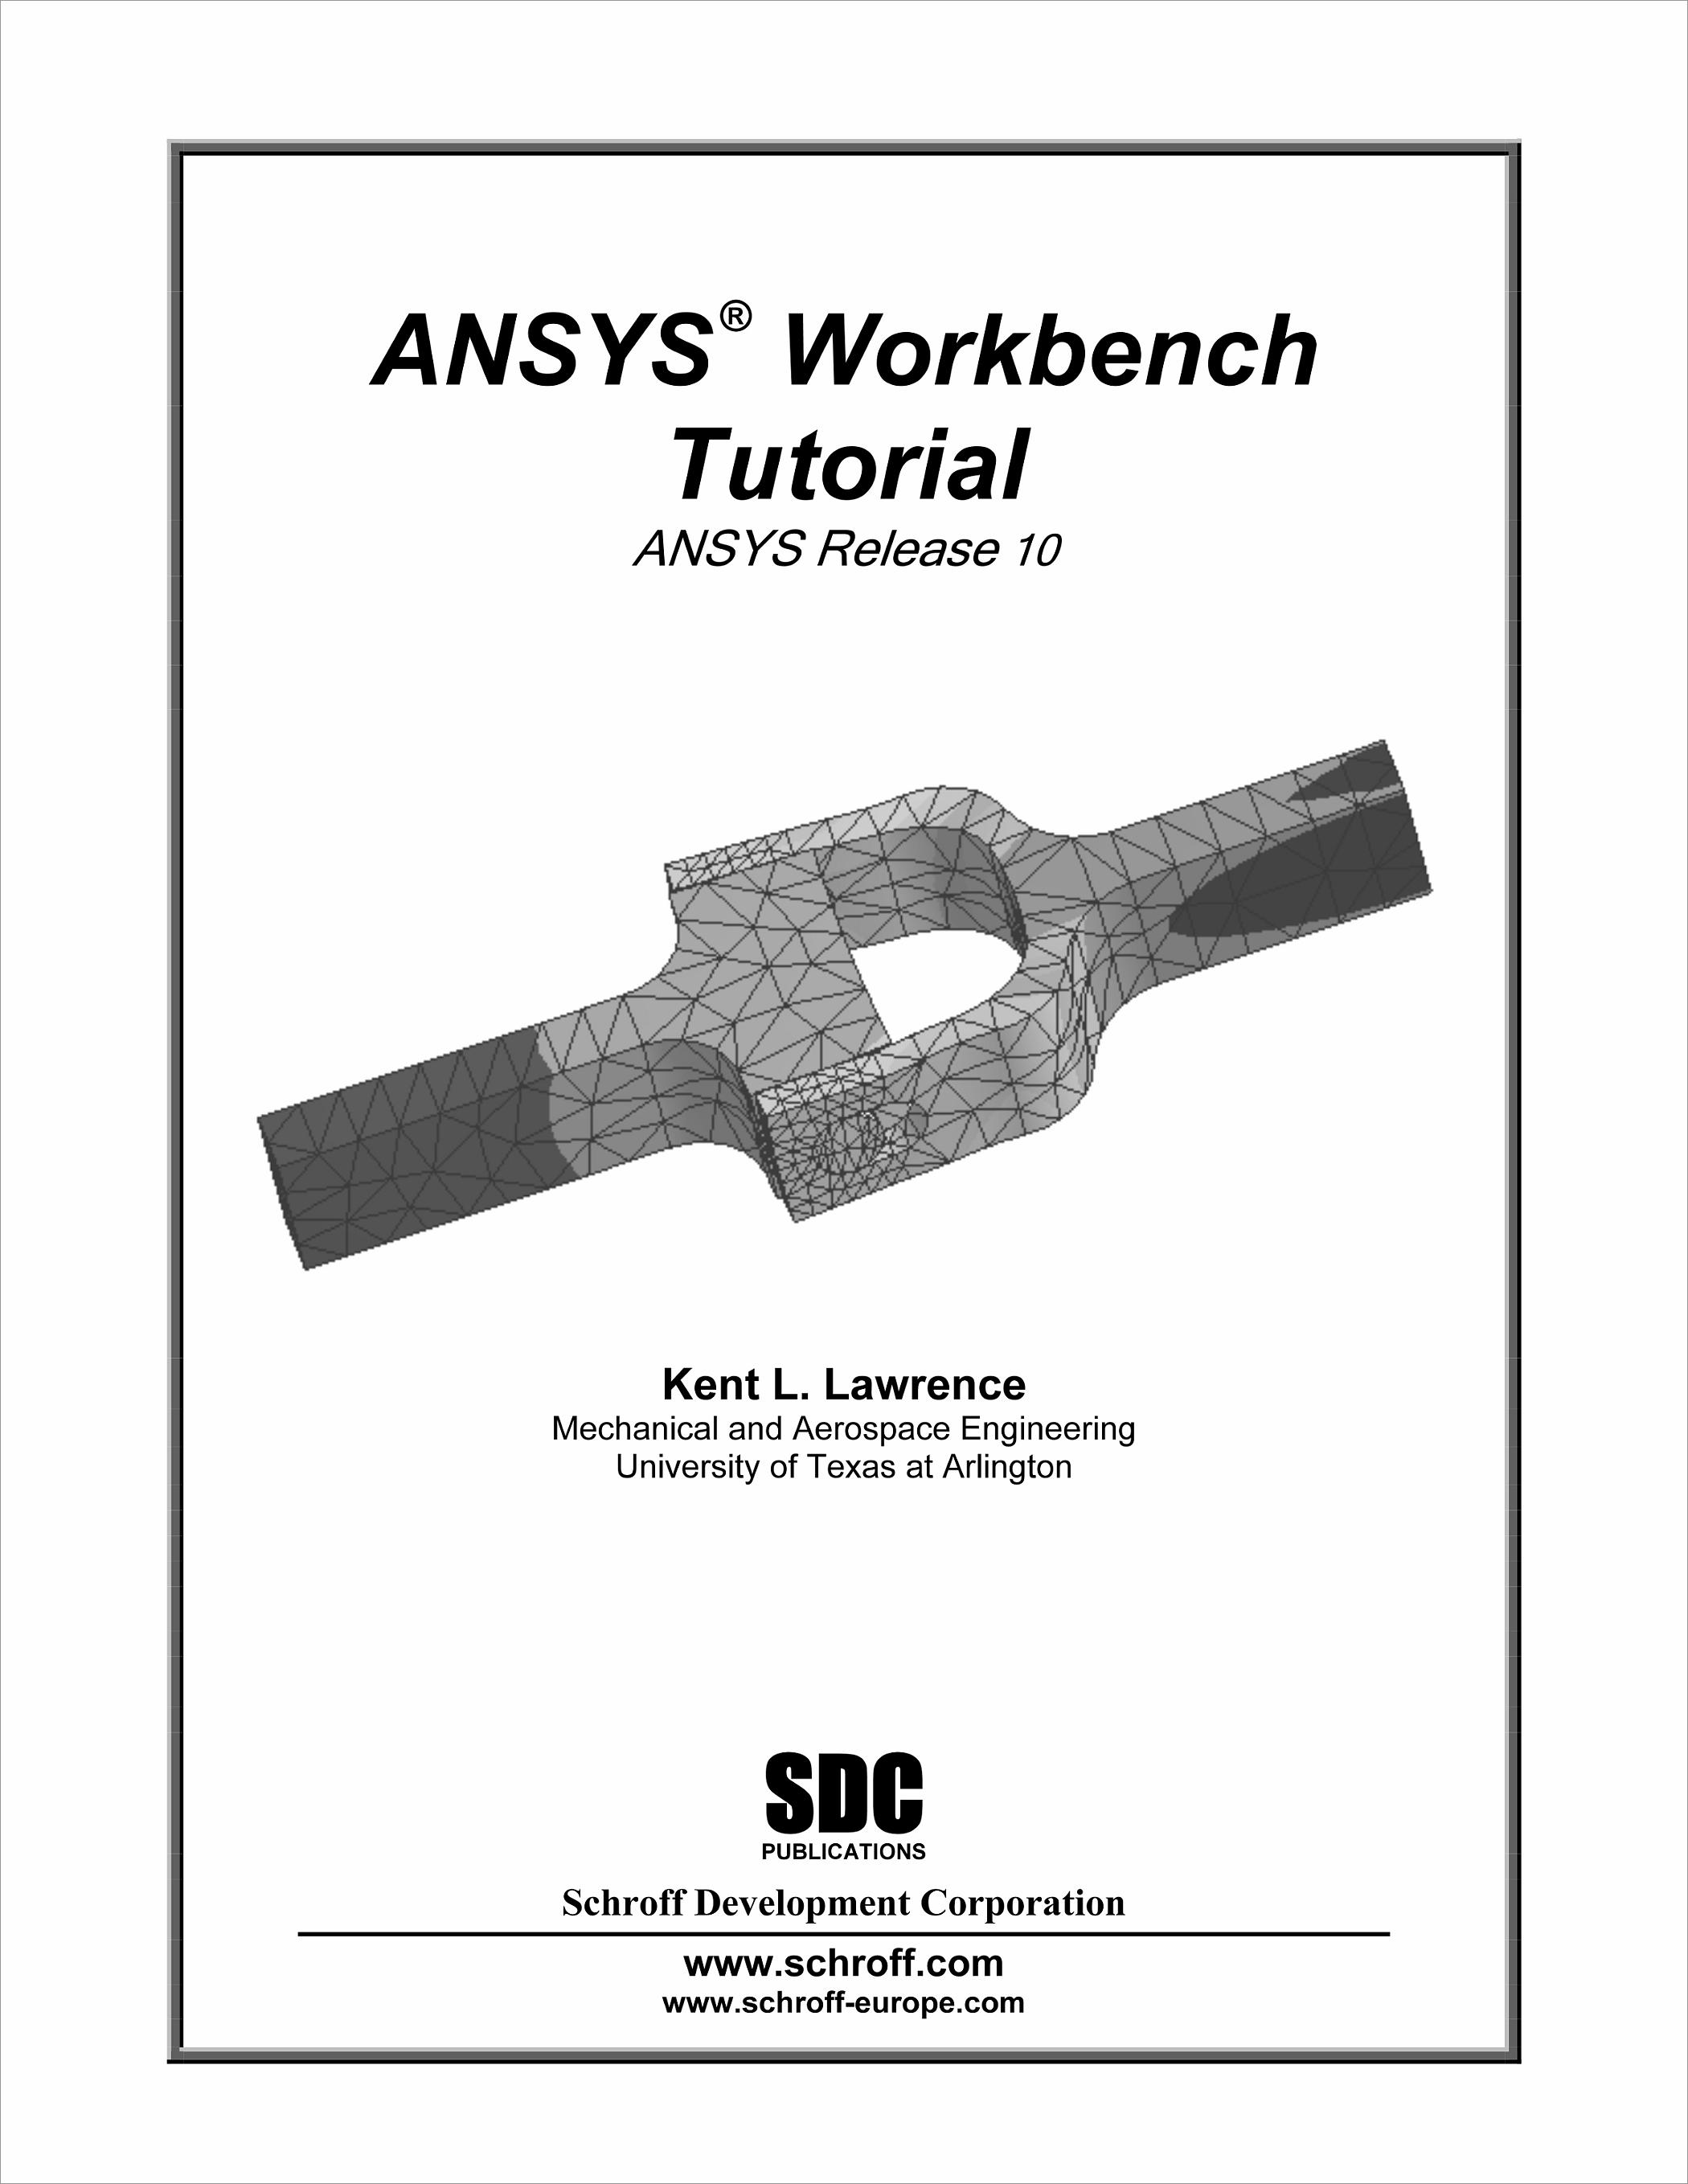 ansys workbench tutorial release 10, book, isbn: 978-1